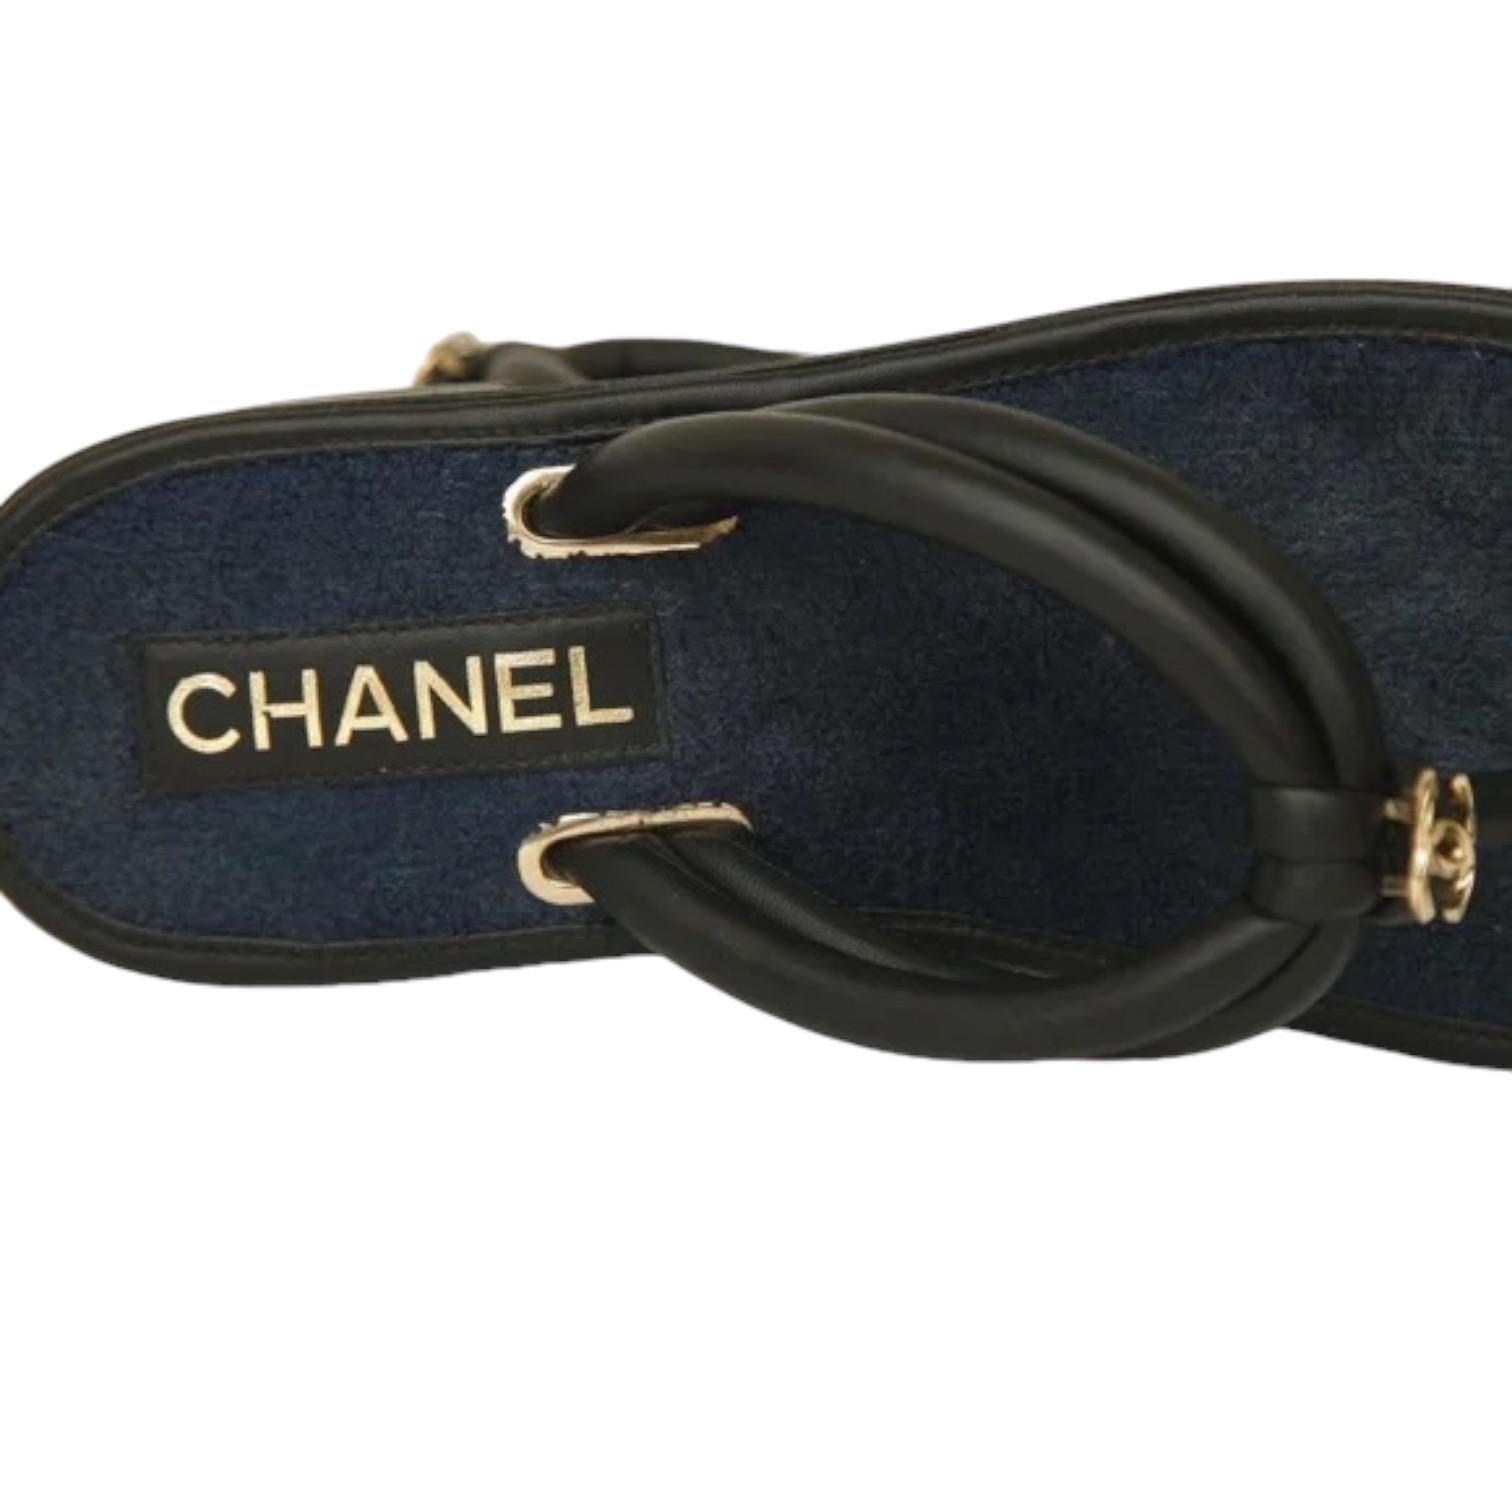 CHANEL Lambskin Leather Slide Thong Sandals Fabric Black Navy Gold CC 38C 6